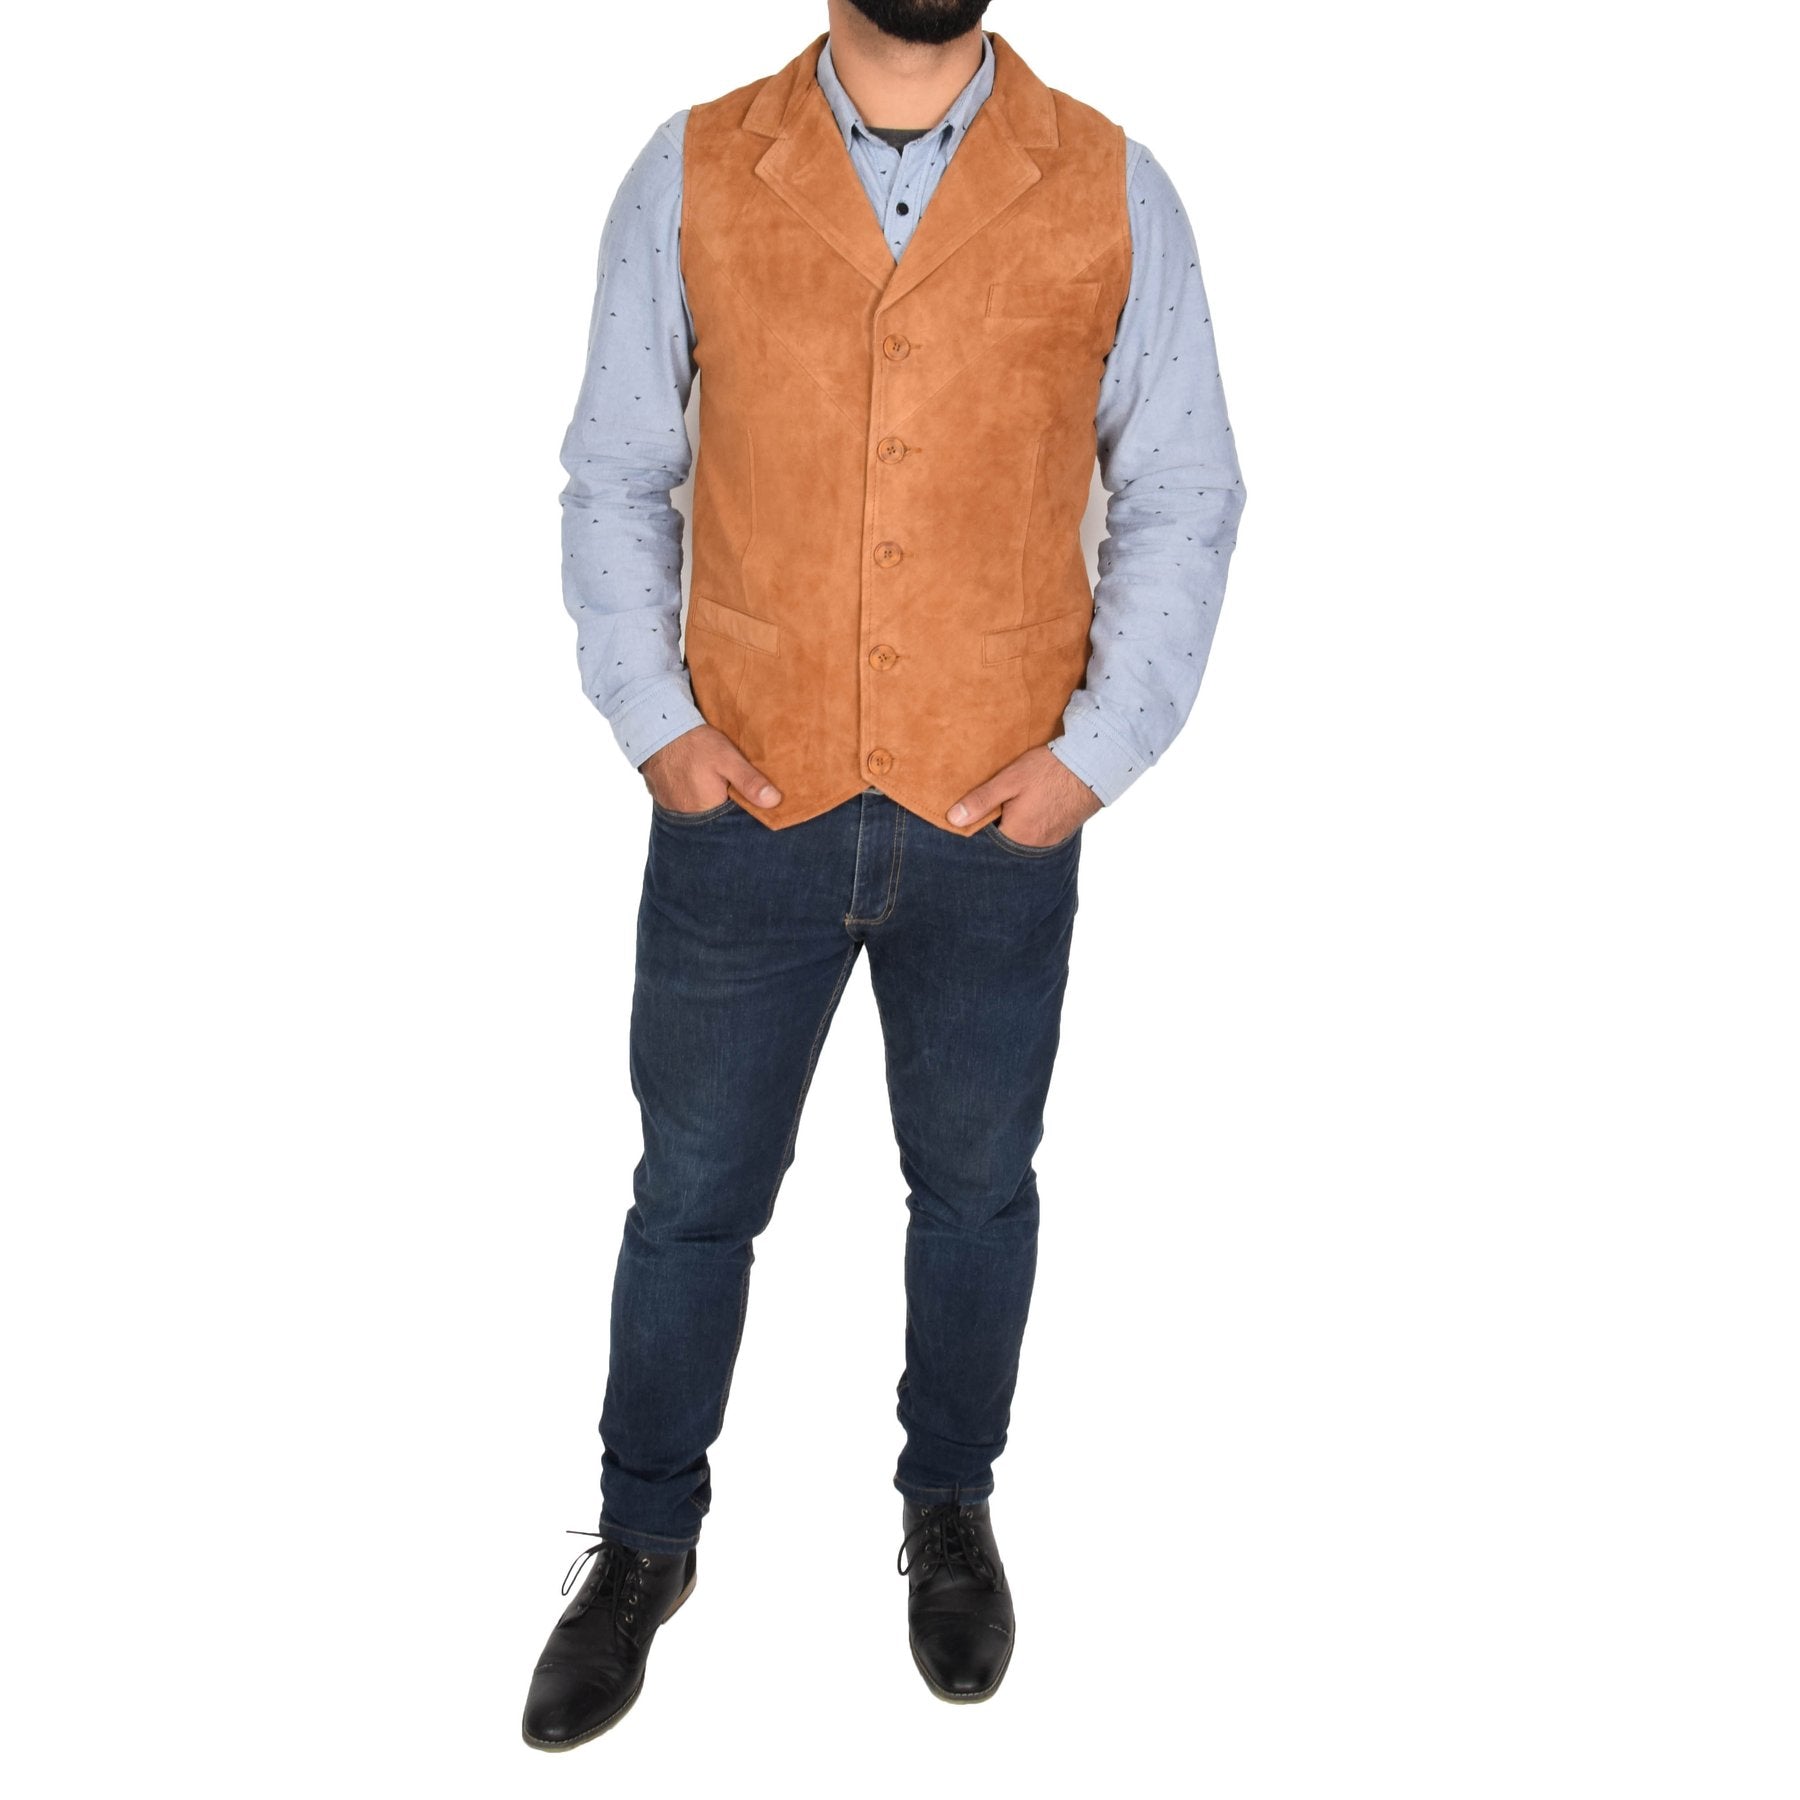 Spine Spark Men's Tan Soft Suede Leather Classic Style Vest